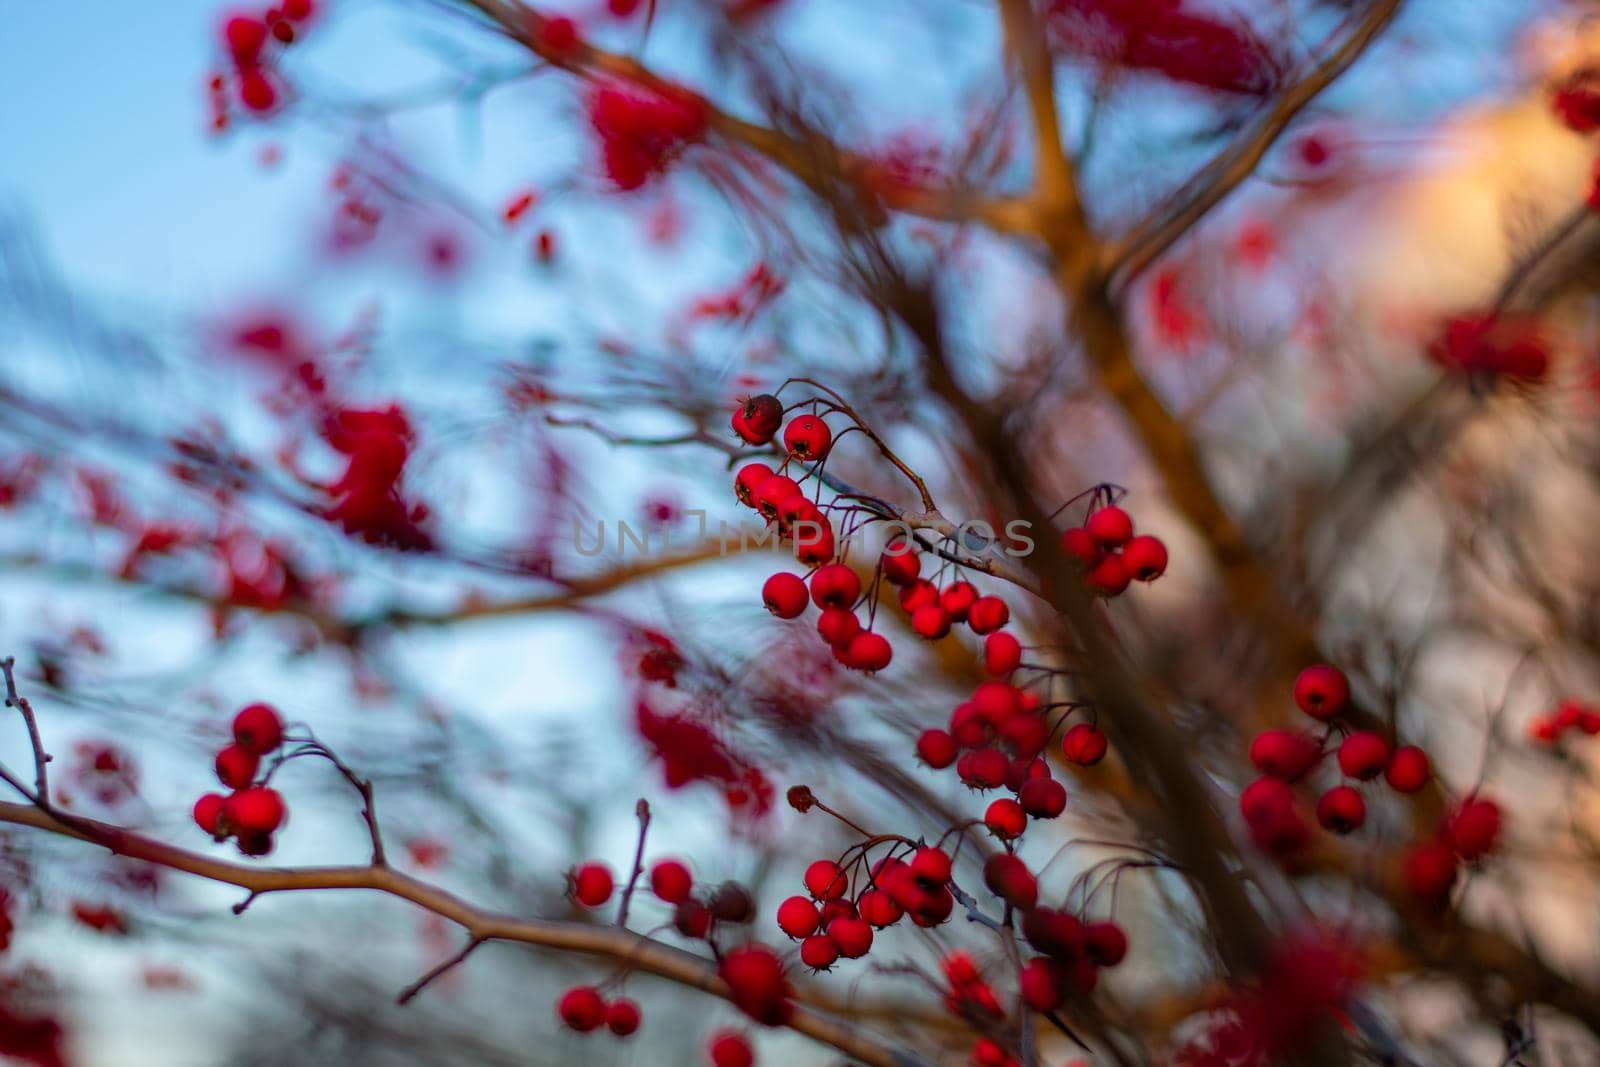 A Bare Tree Covered in Small Red Berries by bju12290